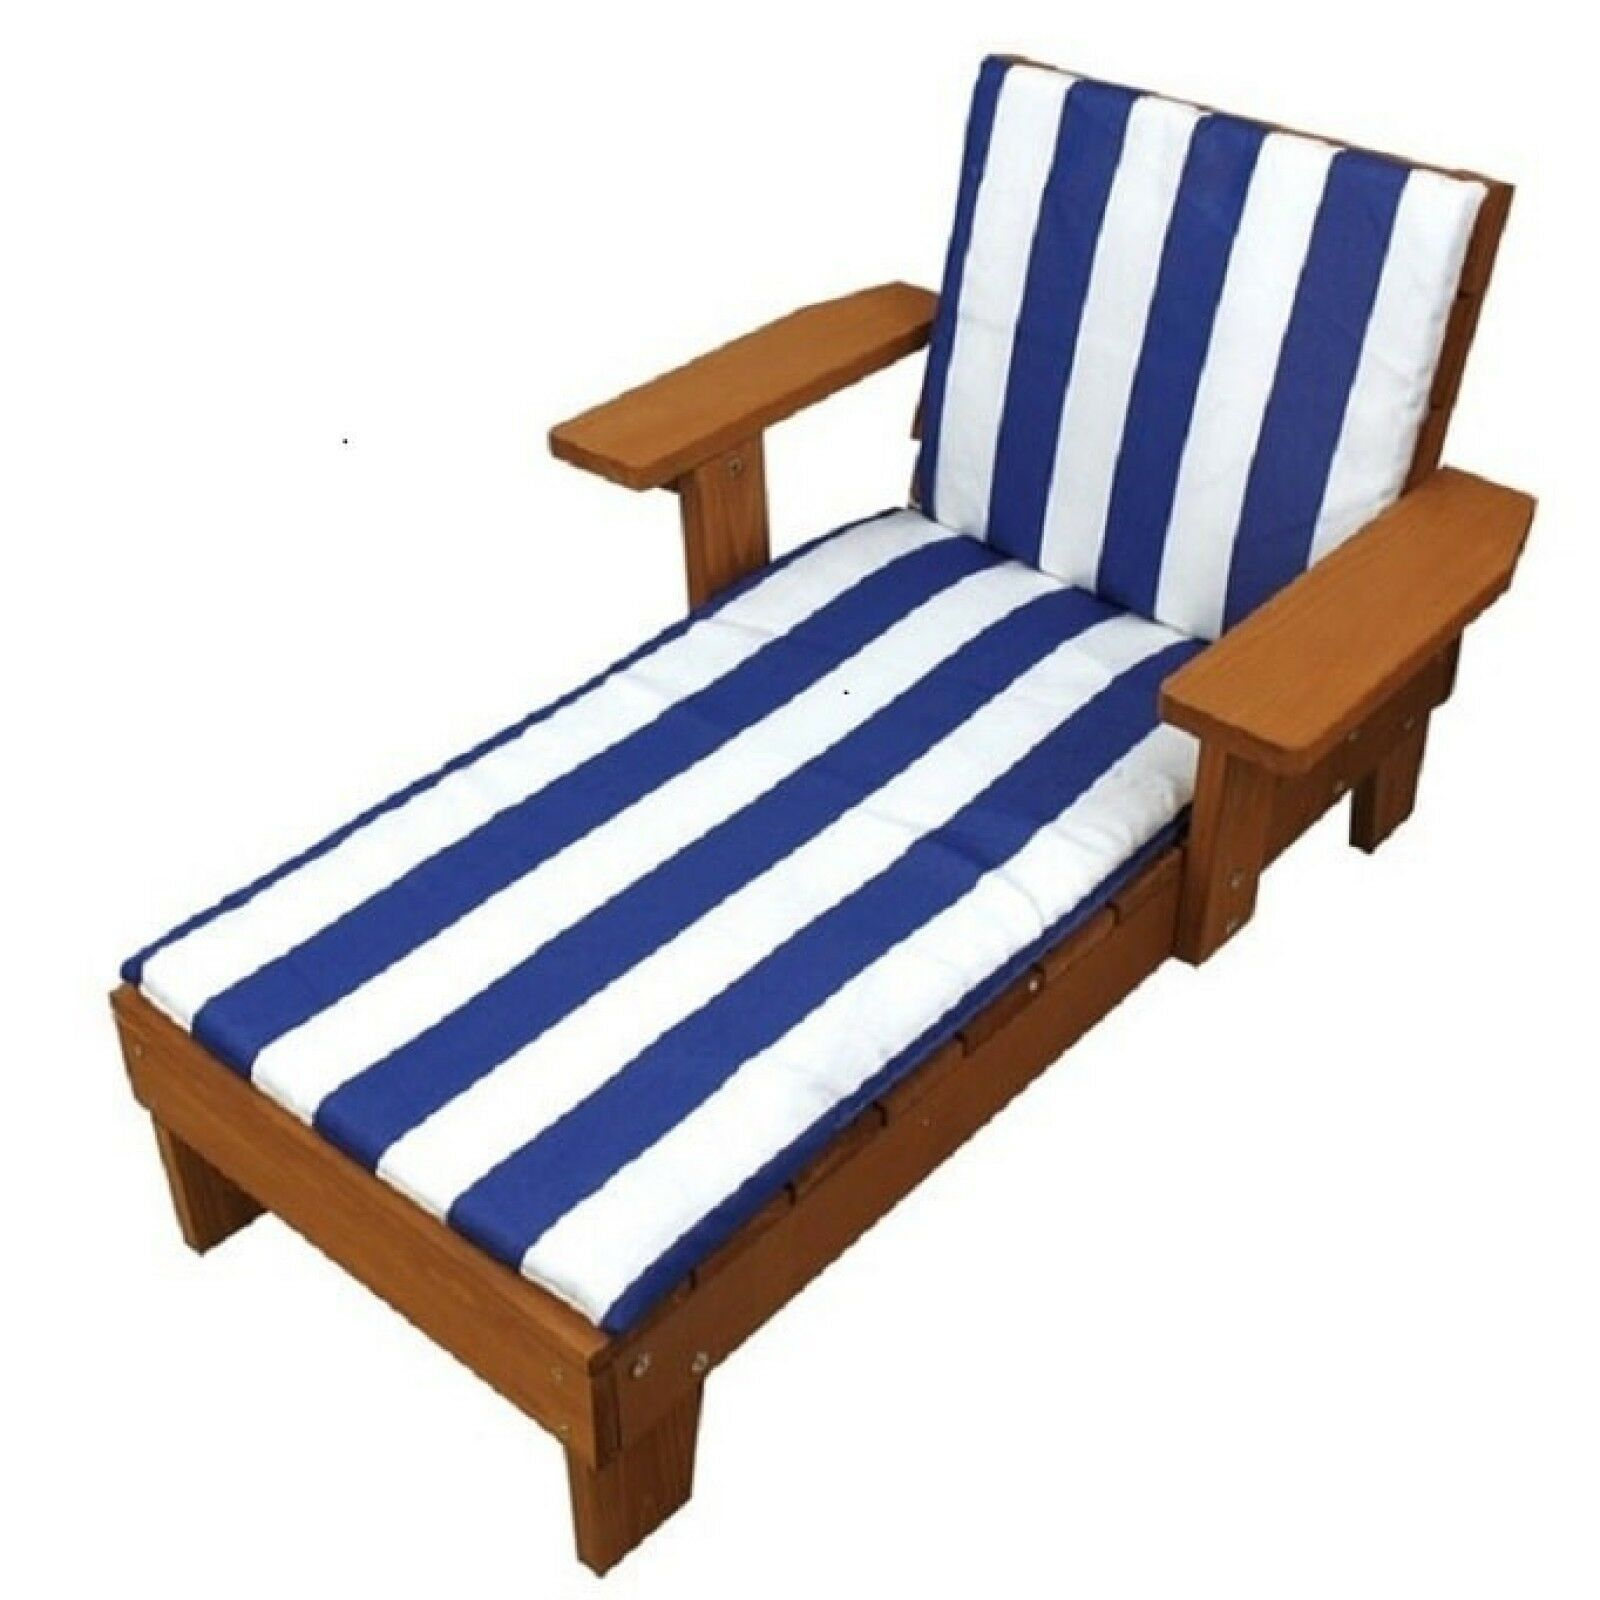 Details About Blue White Striped Patio Chaise Outdoor Pool Chair Cushioned Wooden Furniture in size 1600 X 1600